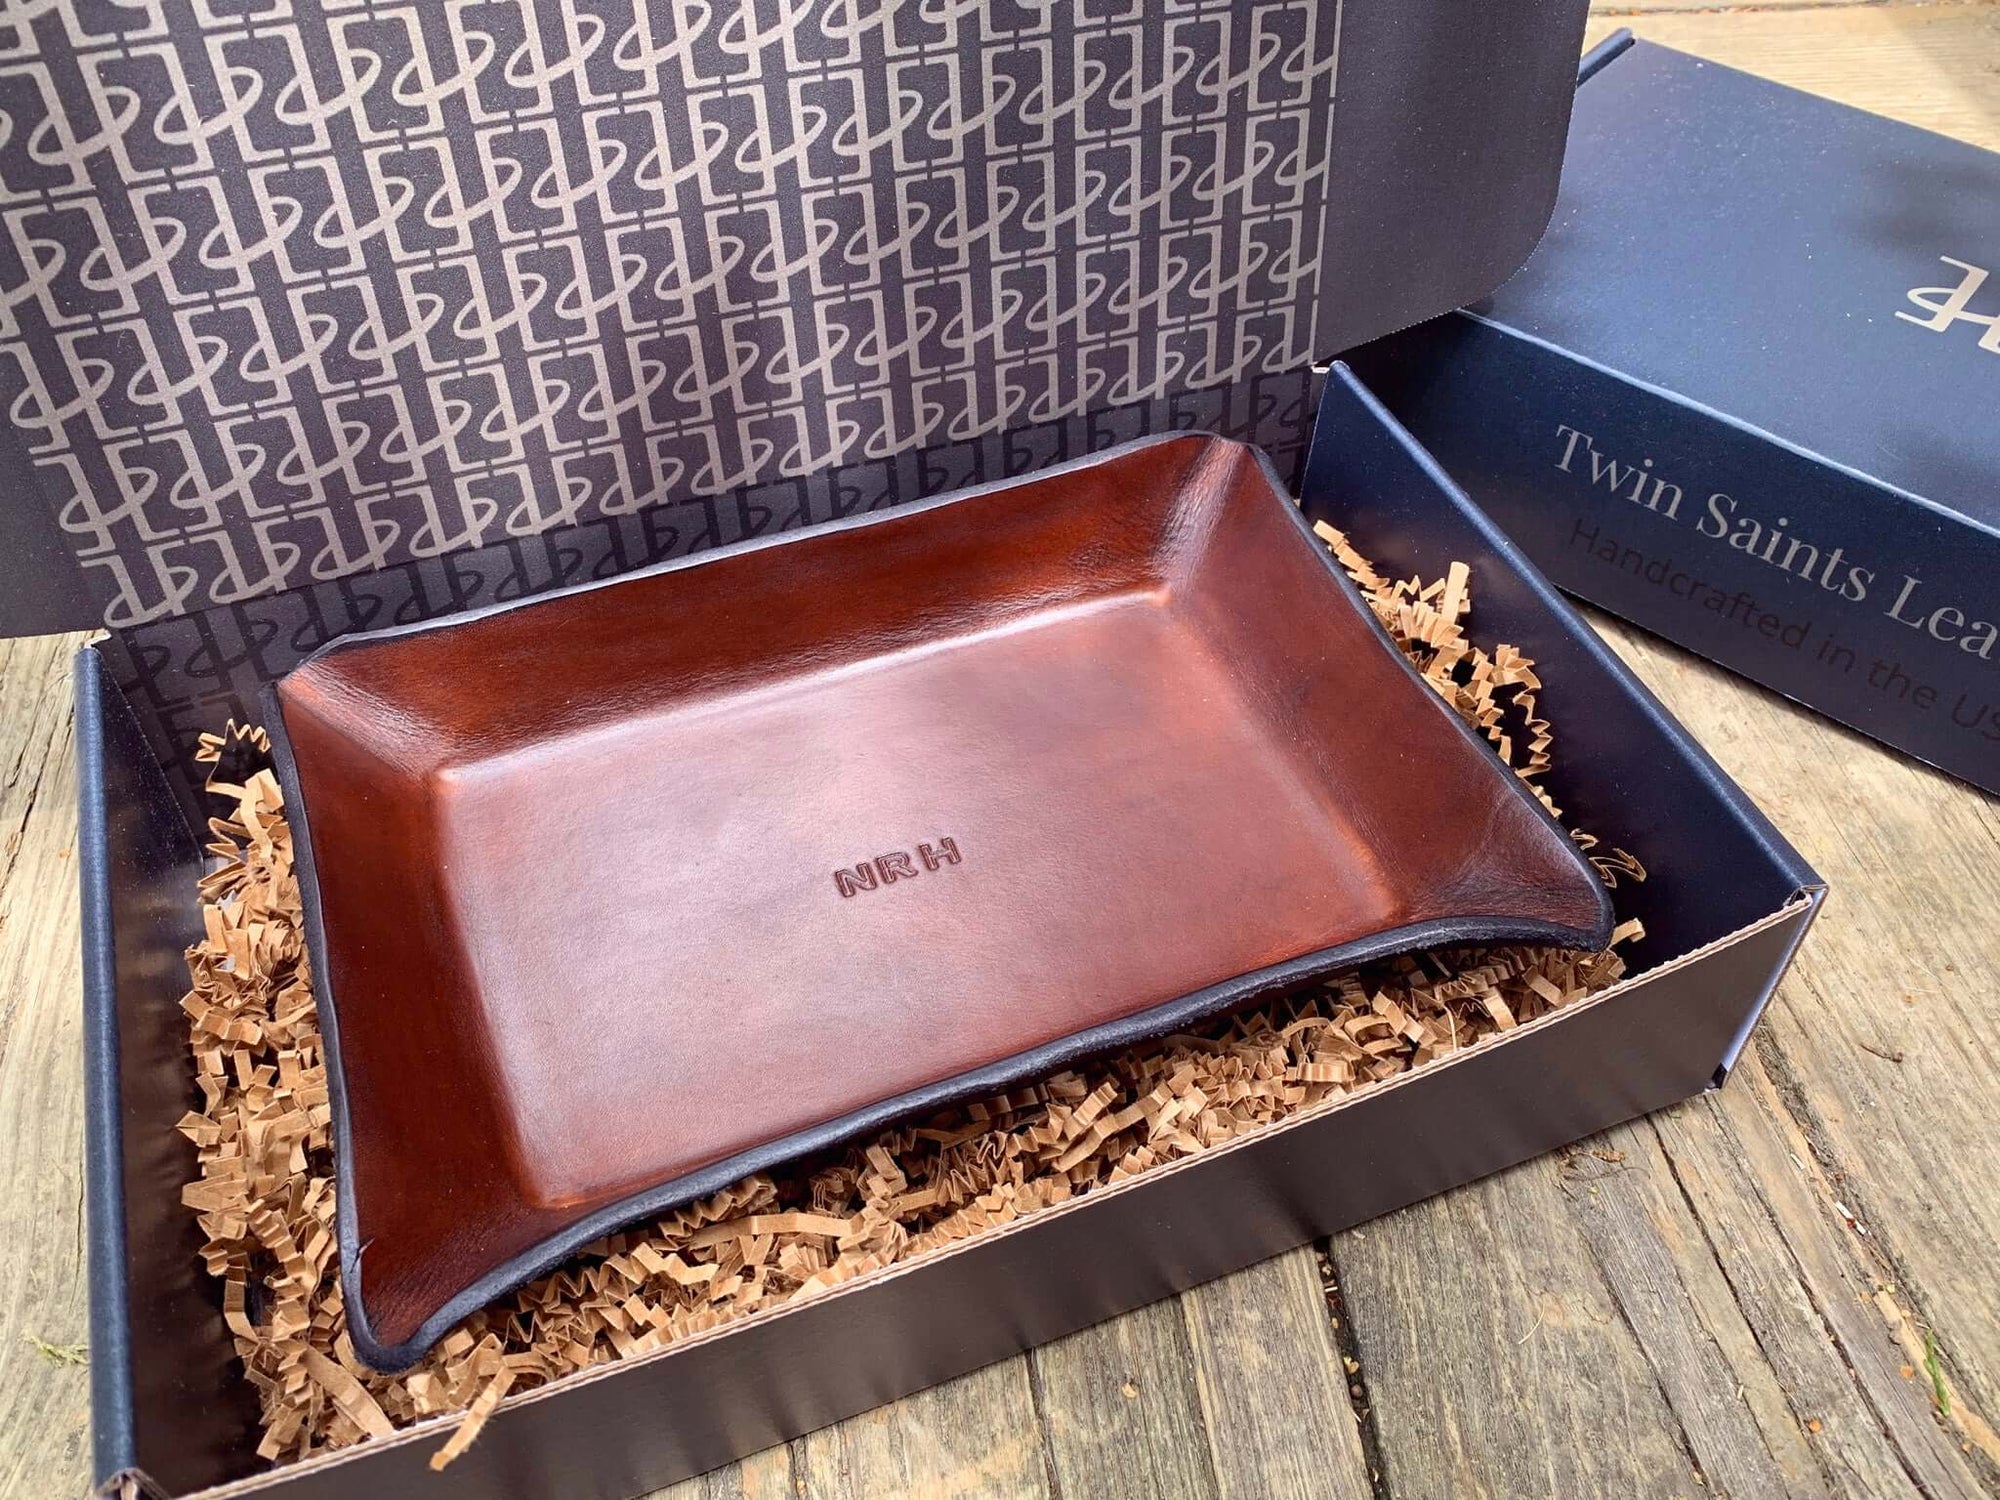 Groomsmens gifts by Twin Saints Leather